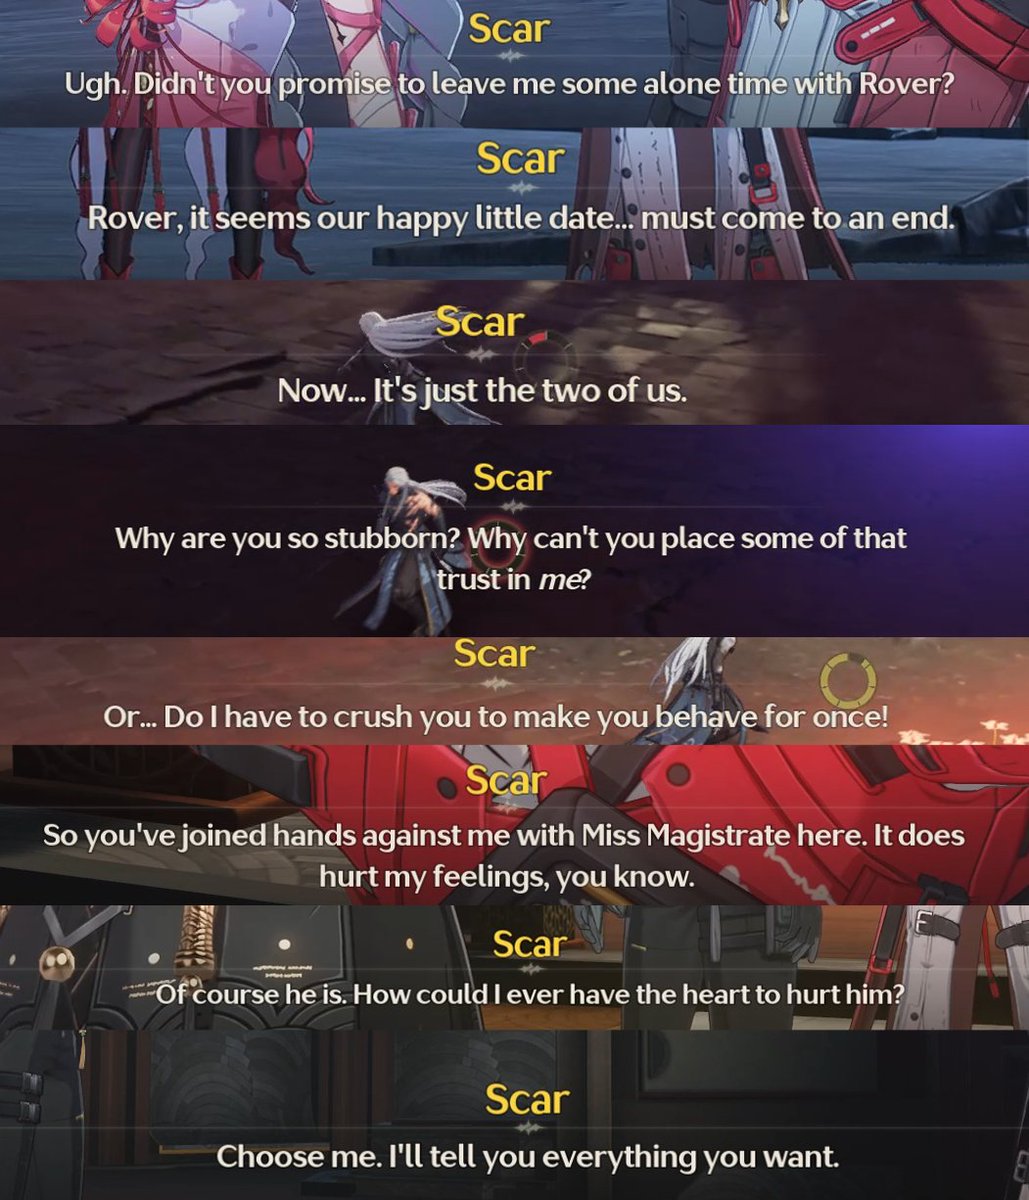 Questionable things Scar said to mrover [🧵]
#scarover #WutheringWaves